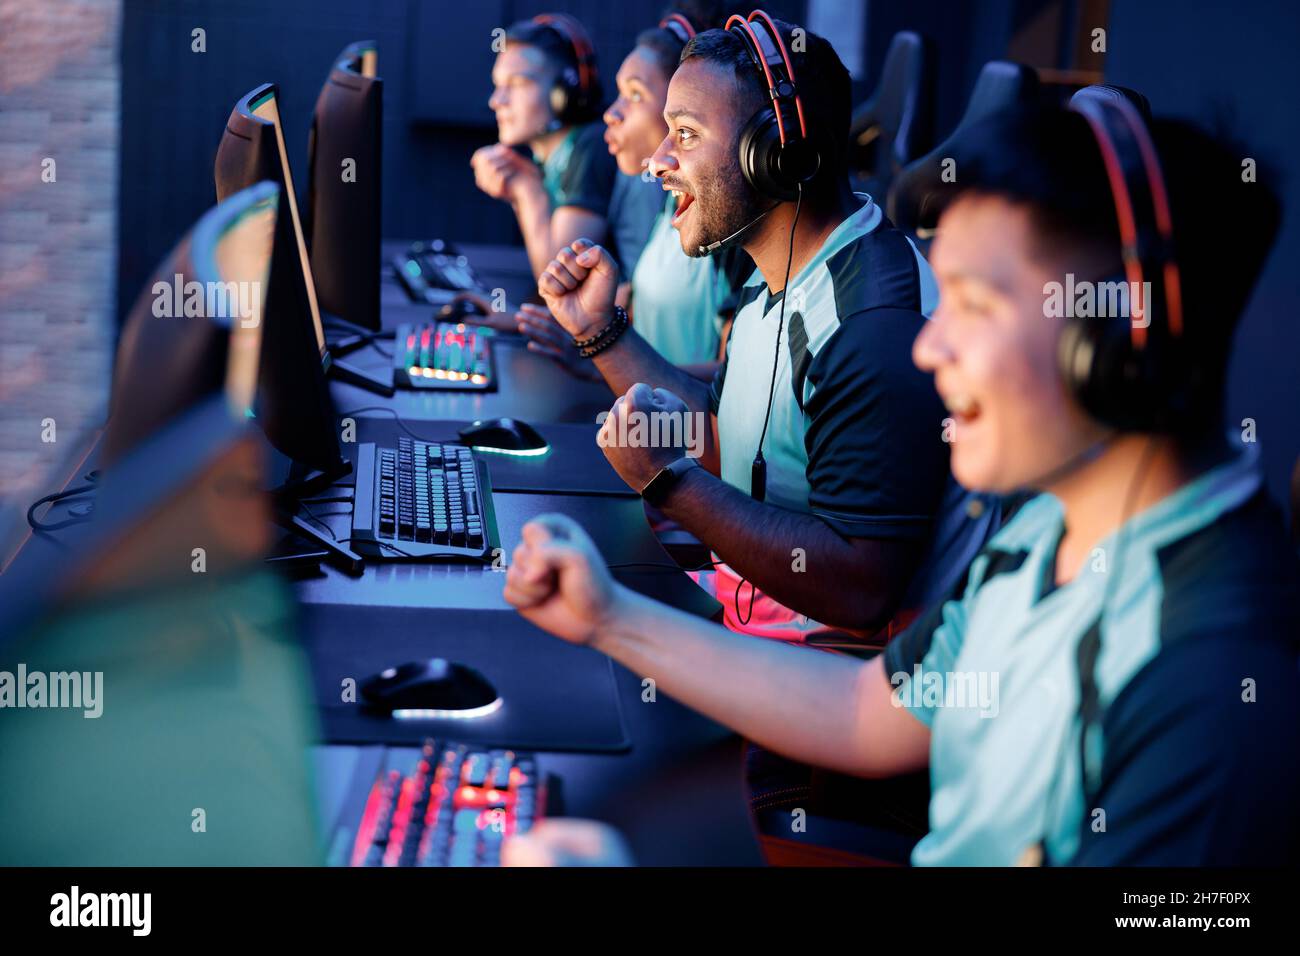 Esports, Competition, Gaming, Multiplayer, Live Streaming. Two Boys Playing  Online Video Game on Playstation. Two Editorial Photography - Image of  monitor, battle: 202411757